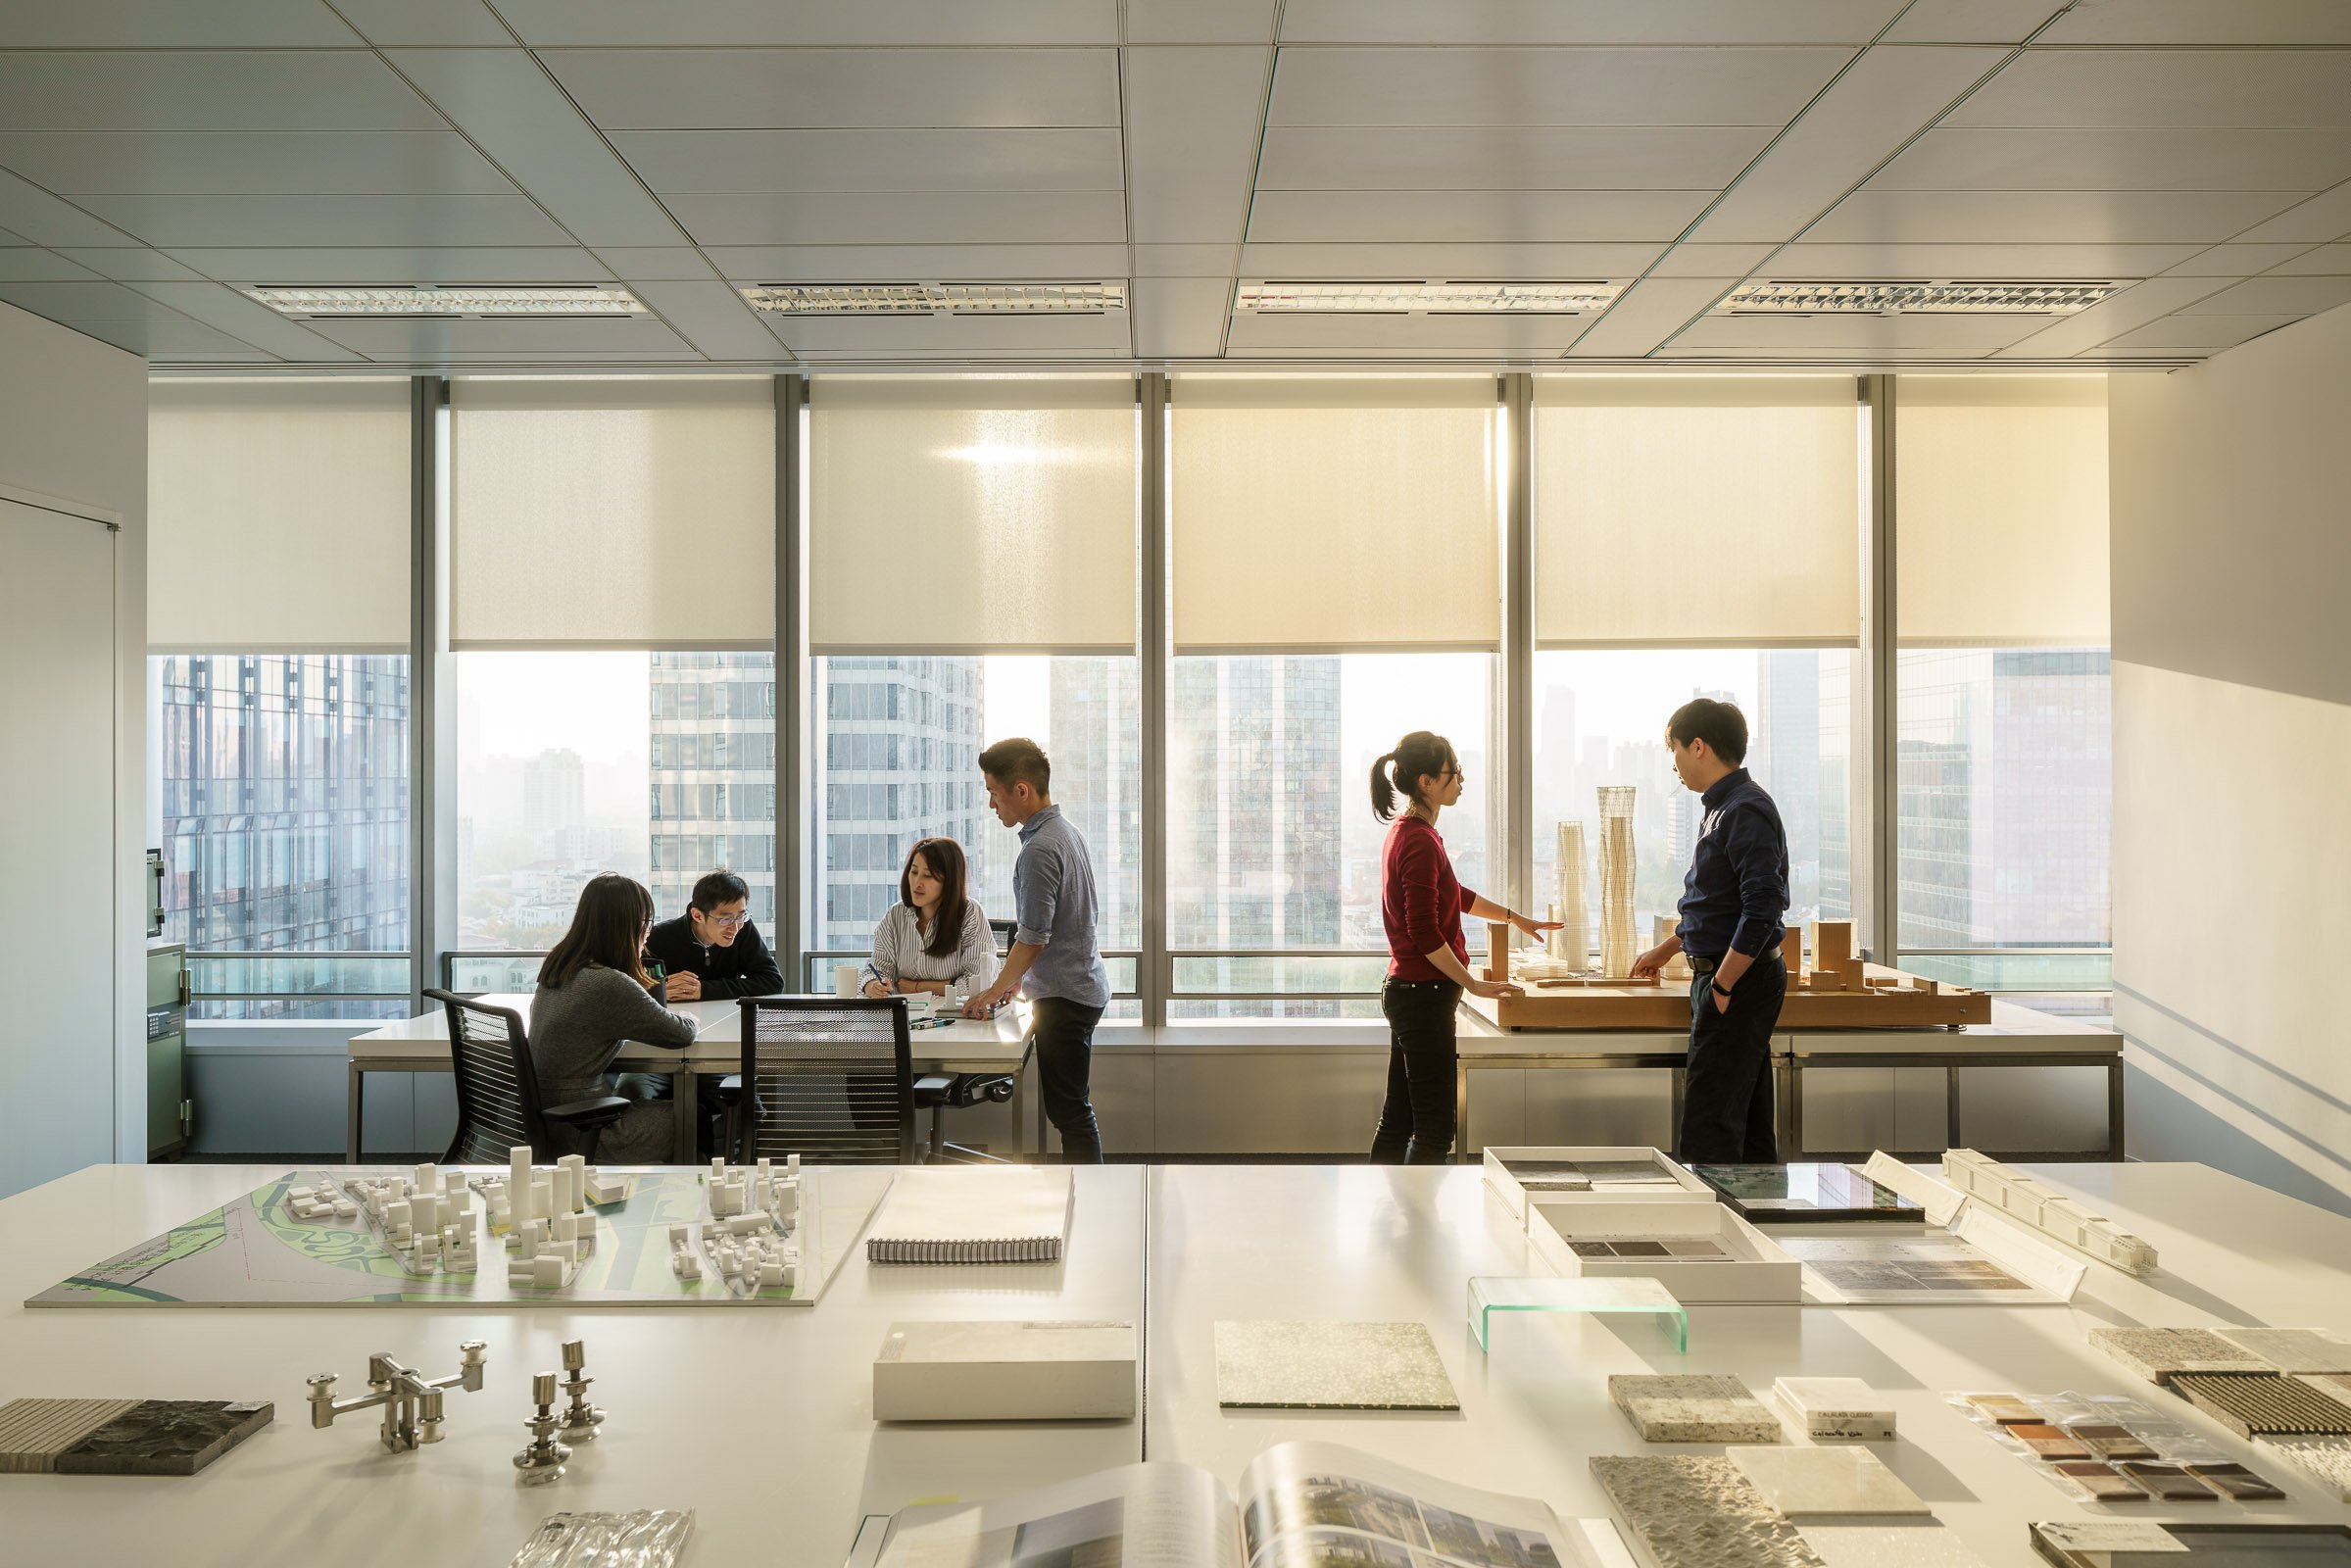  Skidmore, Owings &amp; Merrill LLP (SOM) is one of the largest and most influential architecture, interior design, engineering, and urban planning firms in the world. Founded in 1936, SOM has completed more than 10,000 projects in over 50 countries.